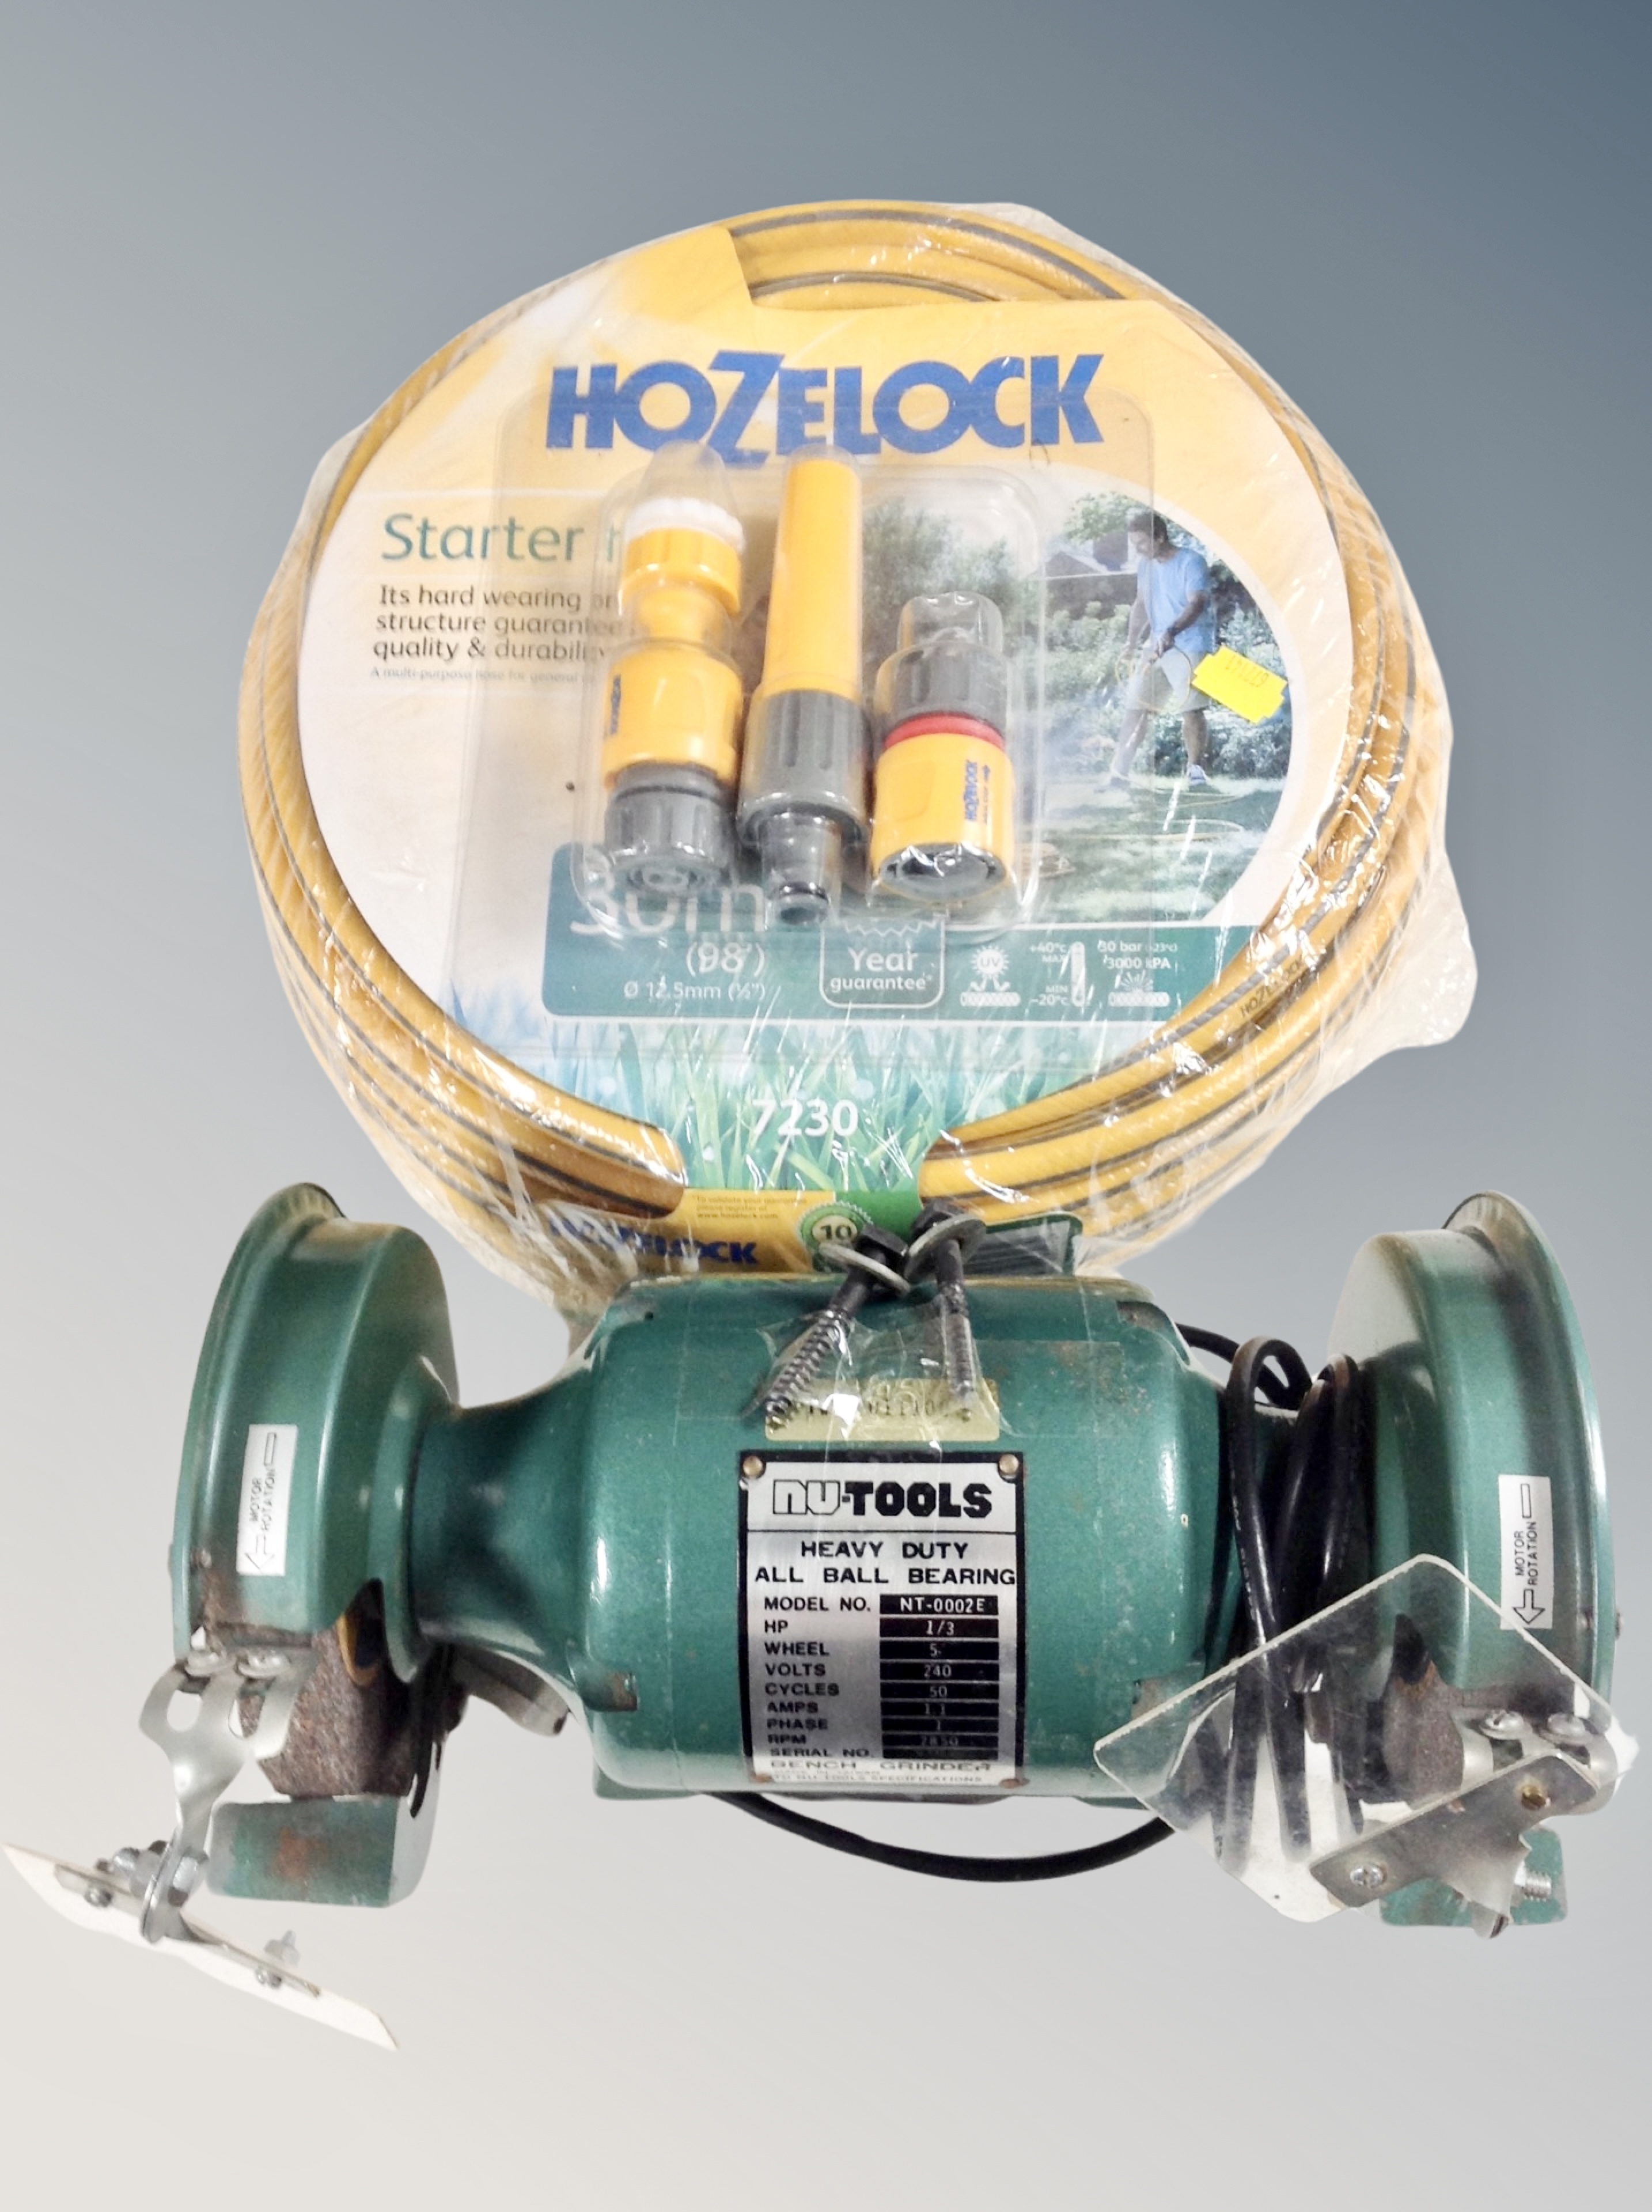 A Hozelock 30m hose with accessories (new),